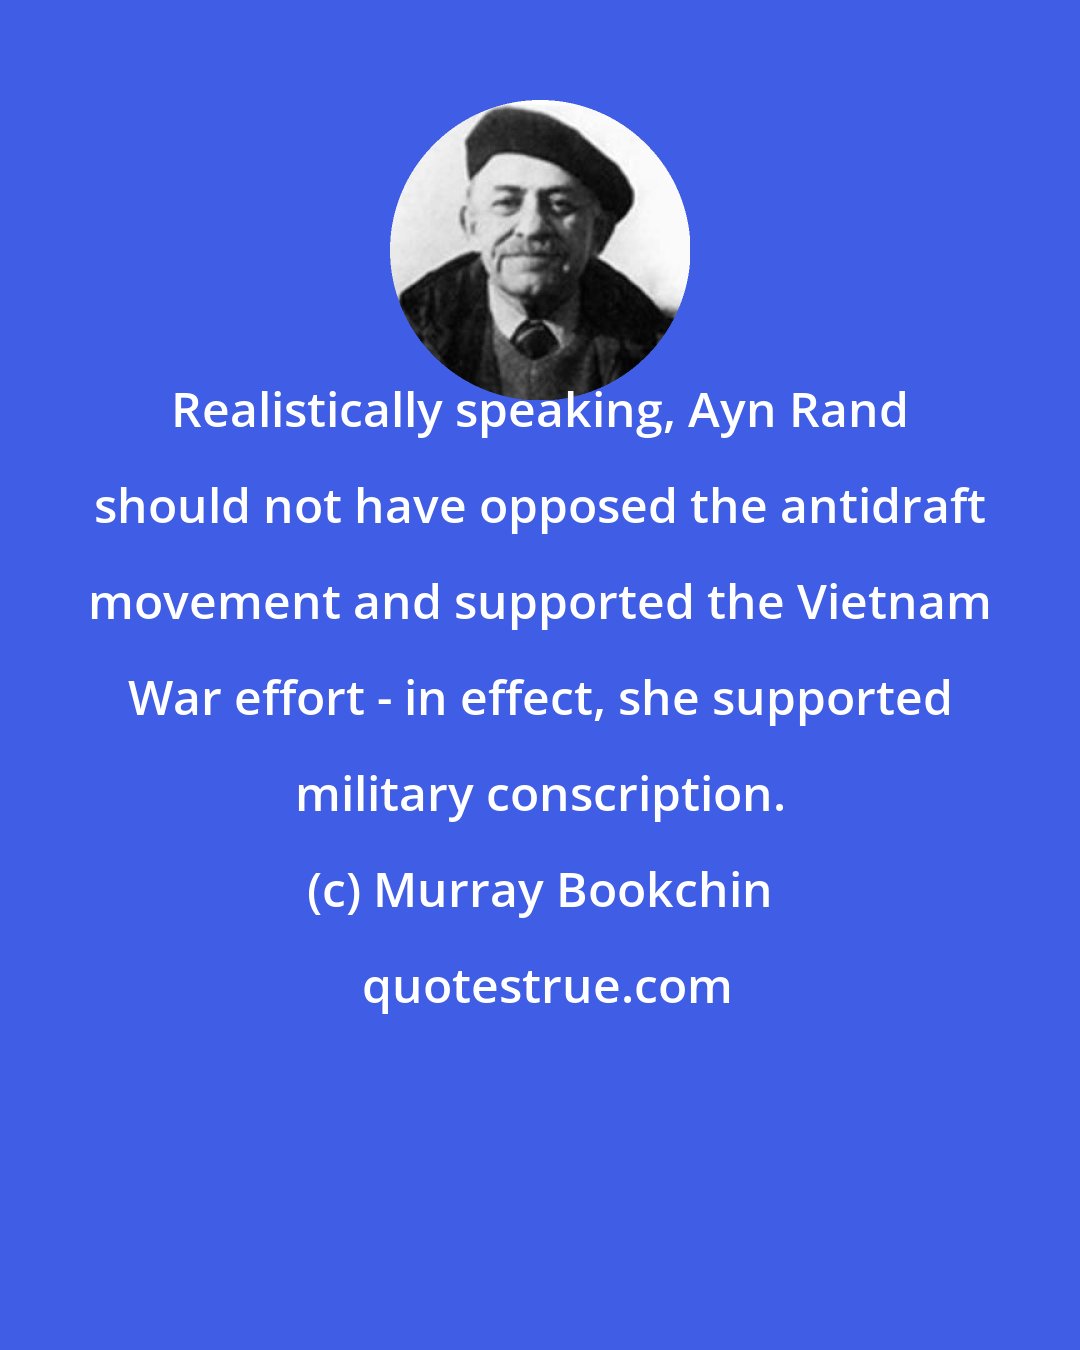 Murray Bookchin: Realistically speaking, Ayn Rand should not have opposed the antidraft movement and supported the Vietnam War effort - in effect, she supported military conscription.